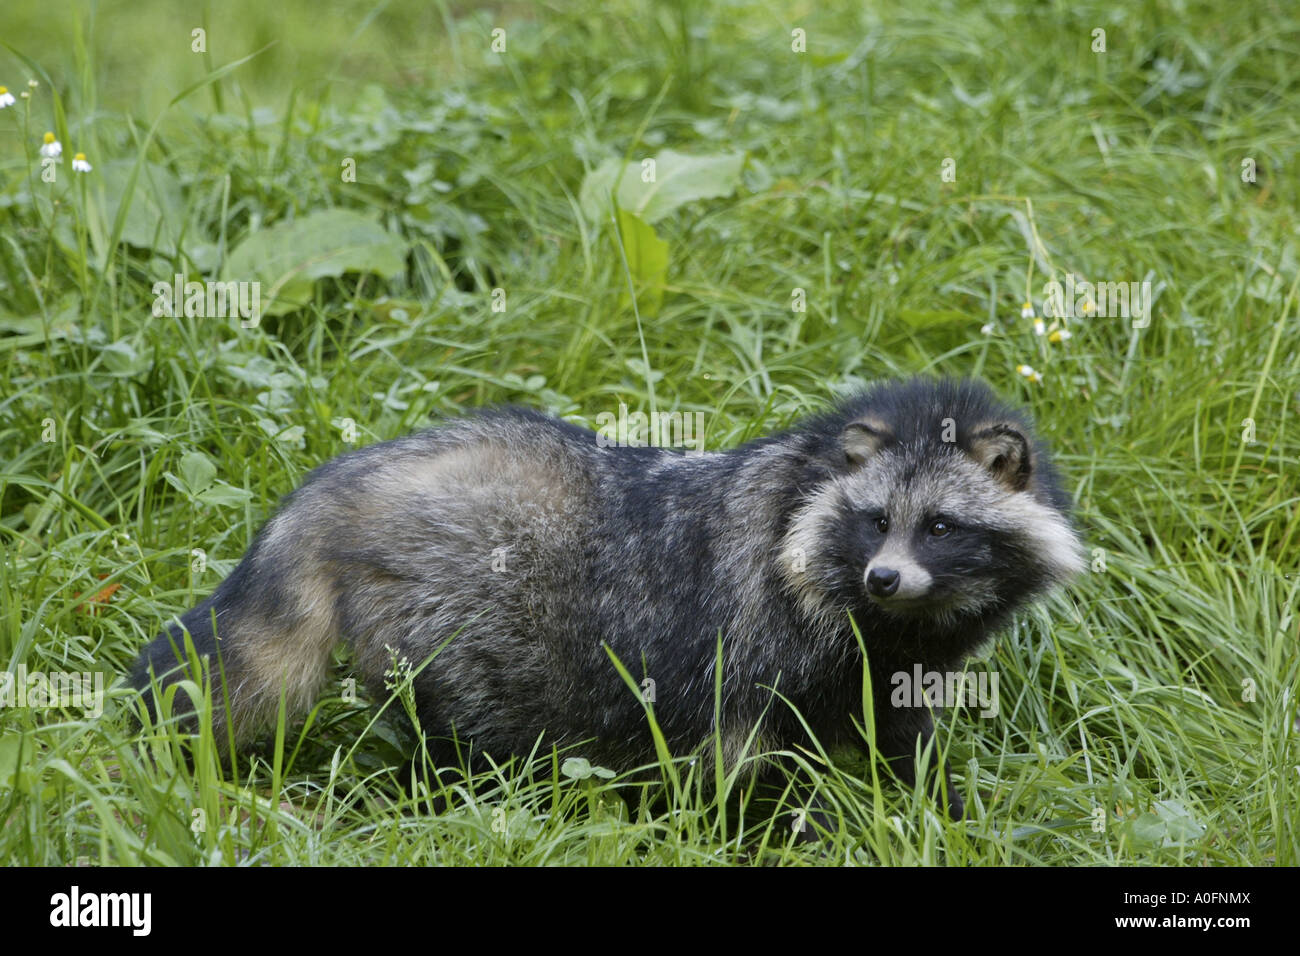 raccoon dog (Nyctereutes procyonoides), standing on a meadow Stock Photo